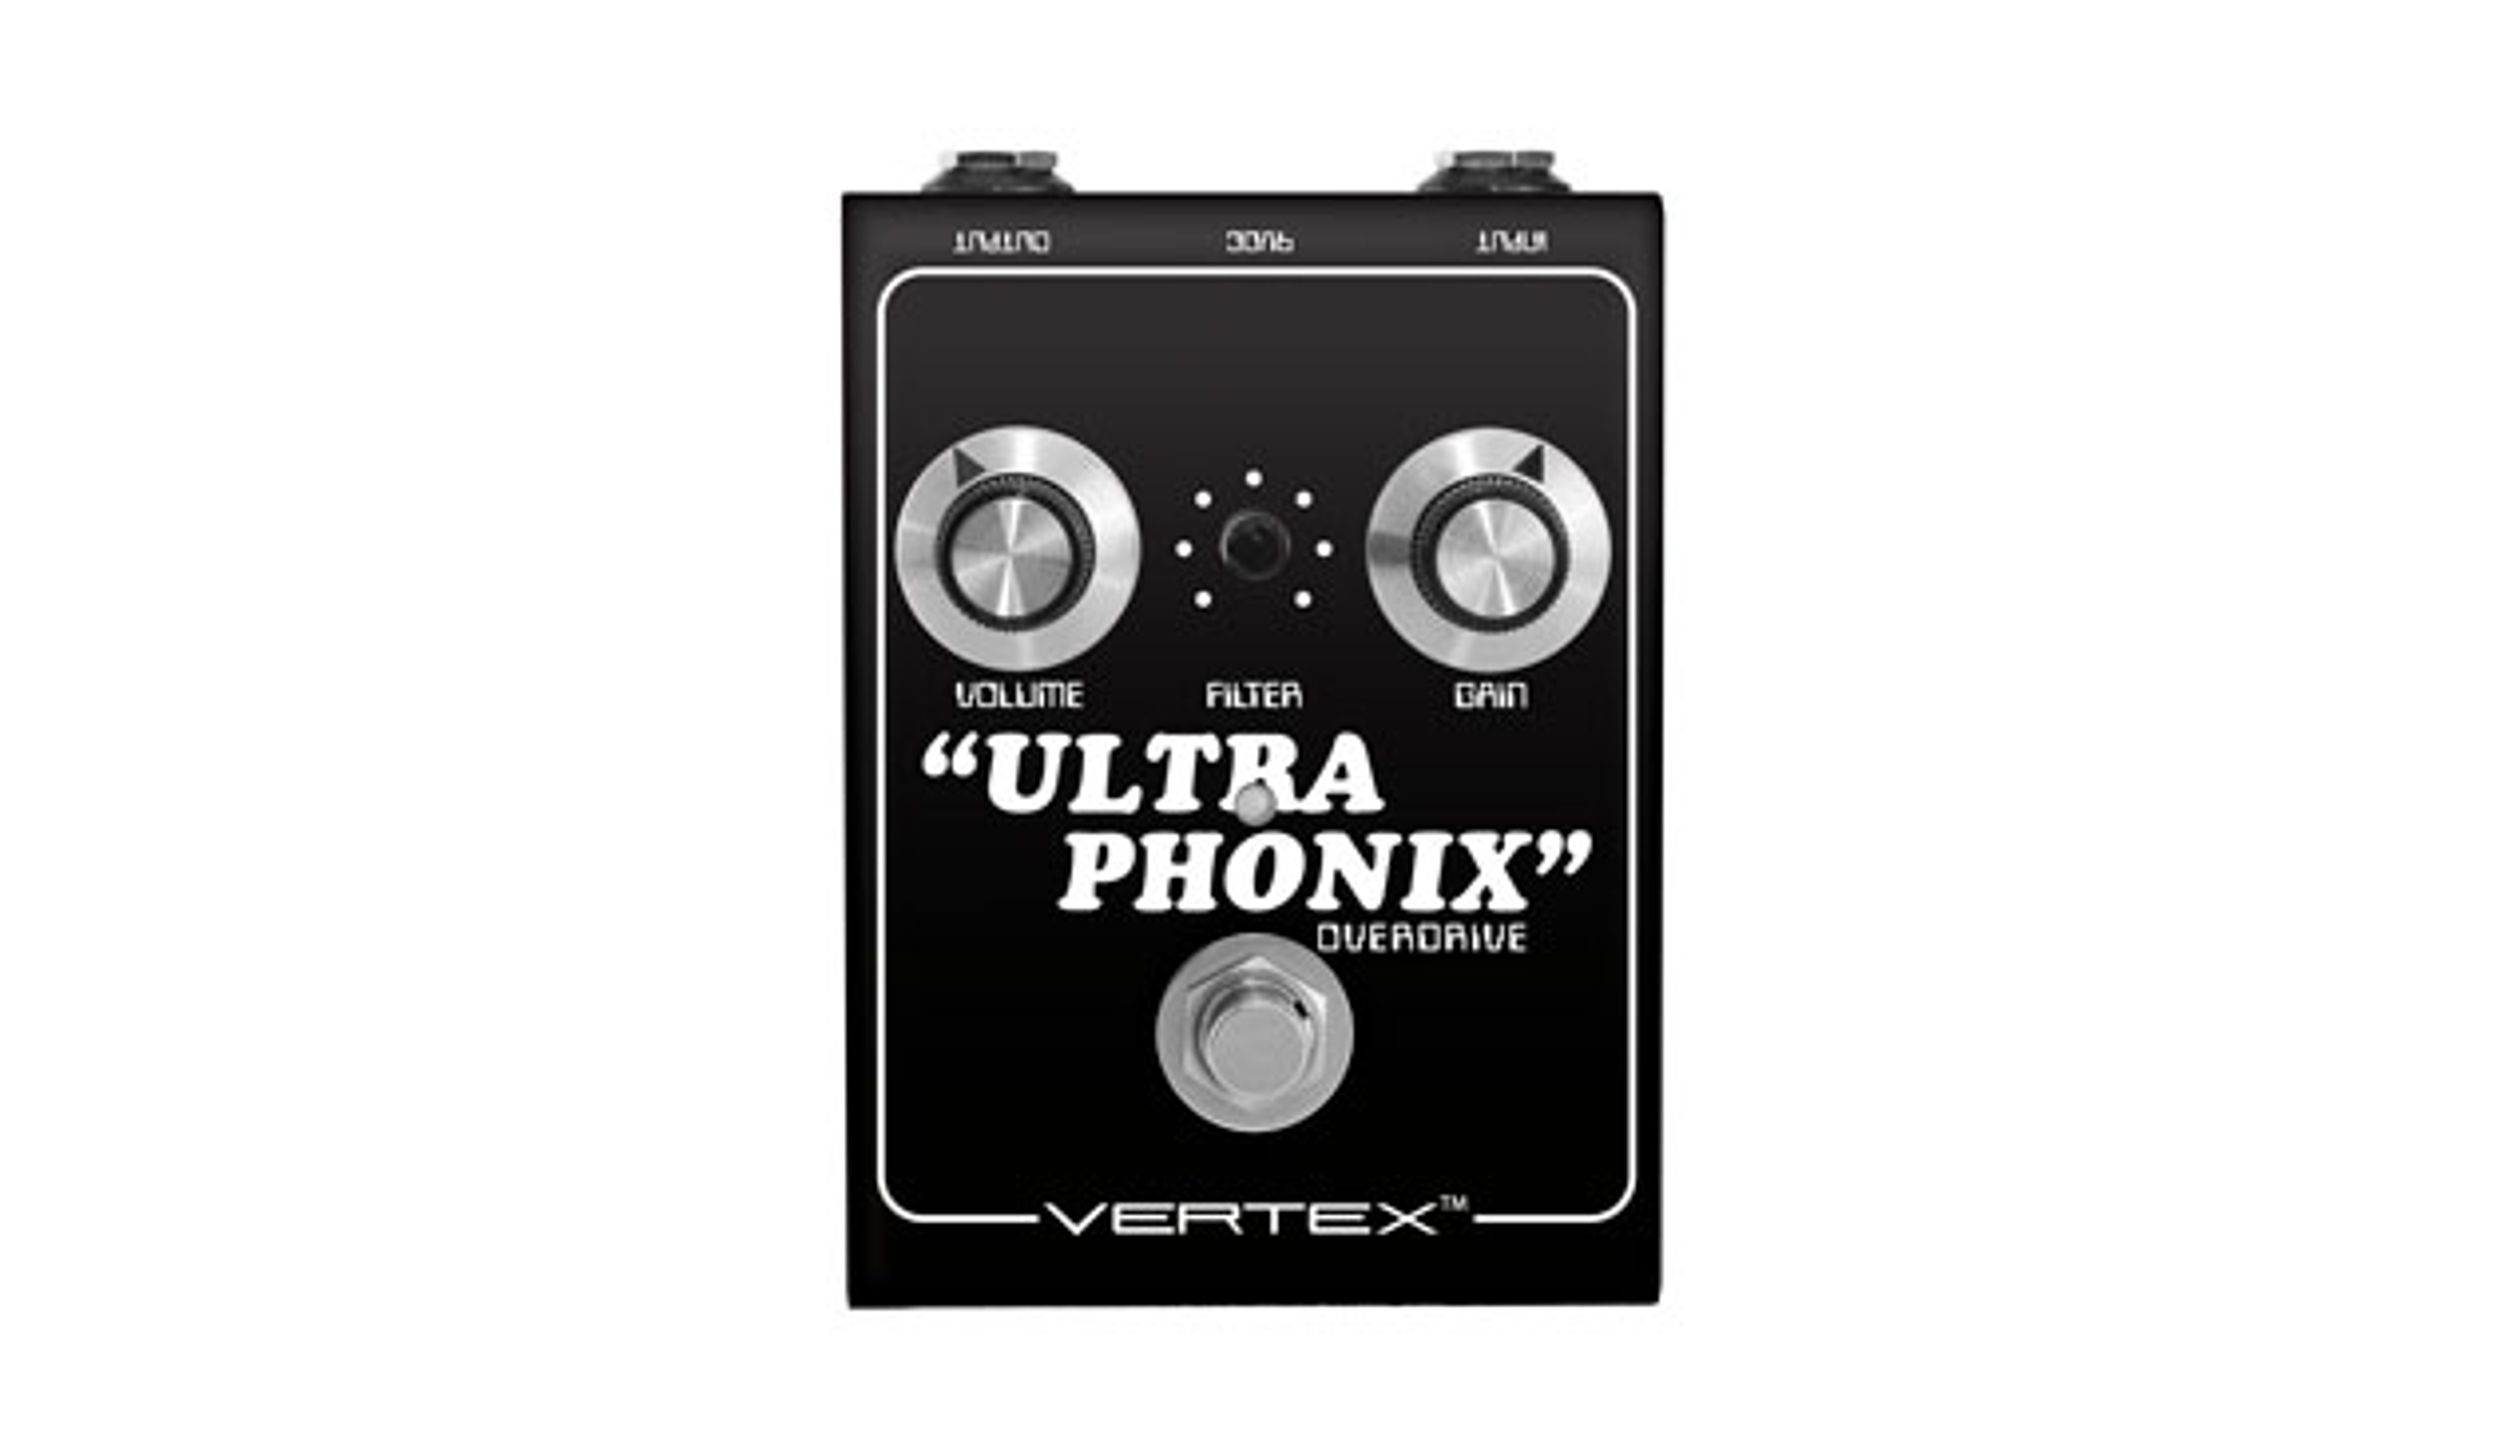 Vertex Effects Announces the Ultraphonix Overdrive